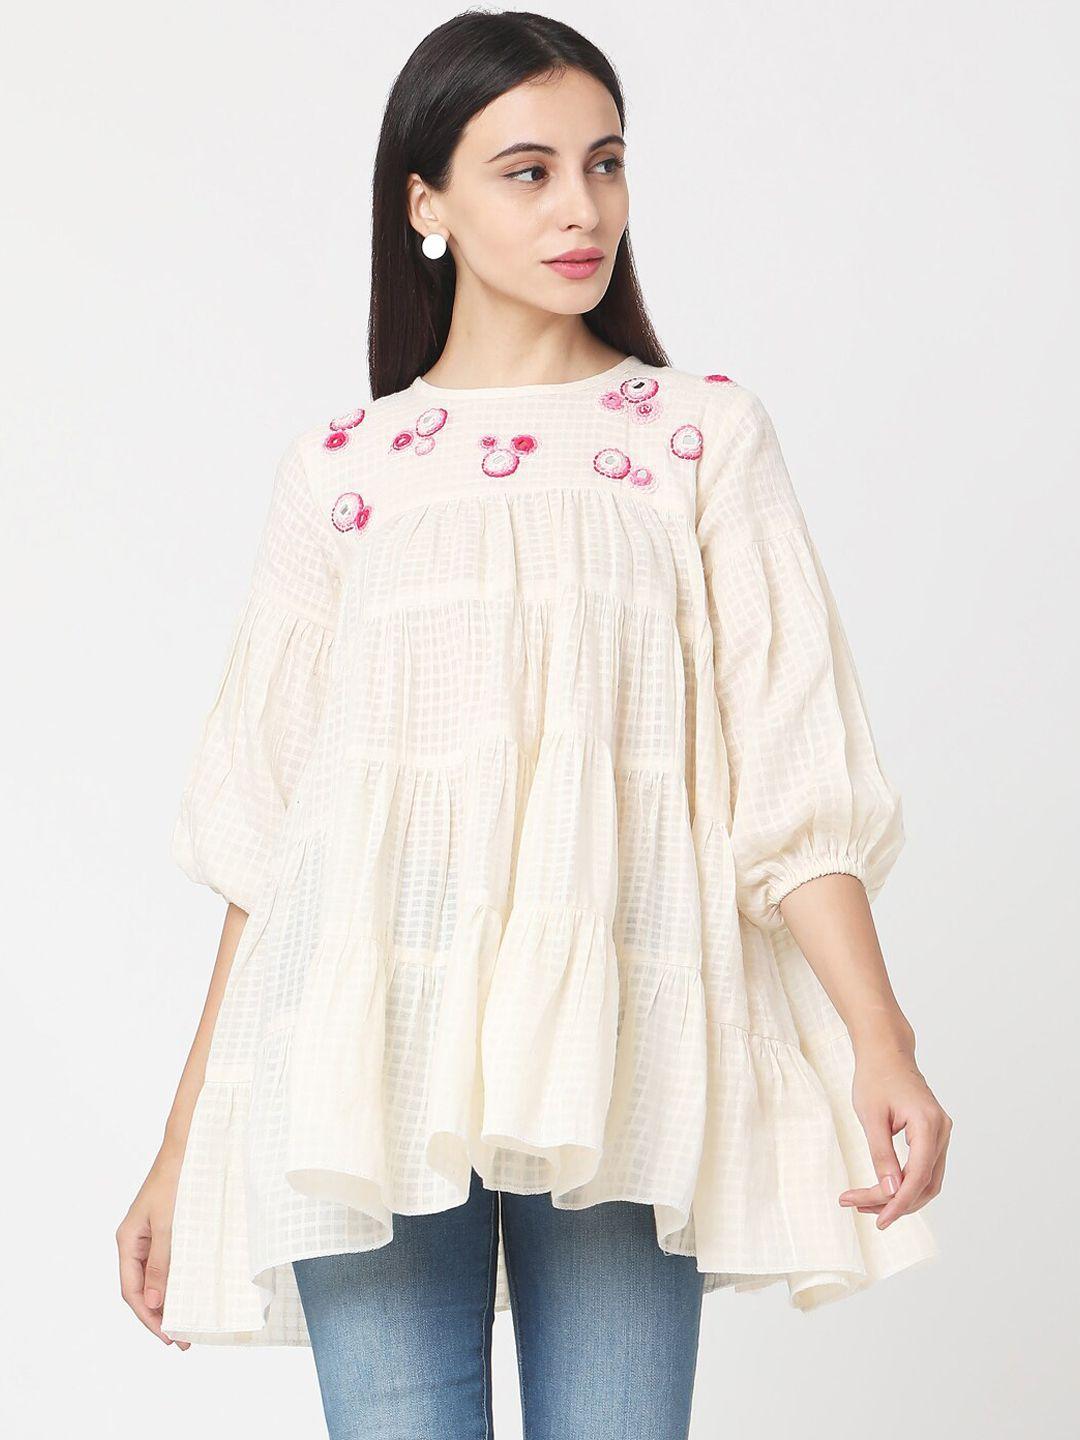 saanjh women off white & pink embroidered tunic